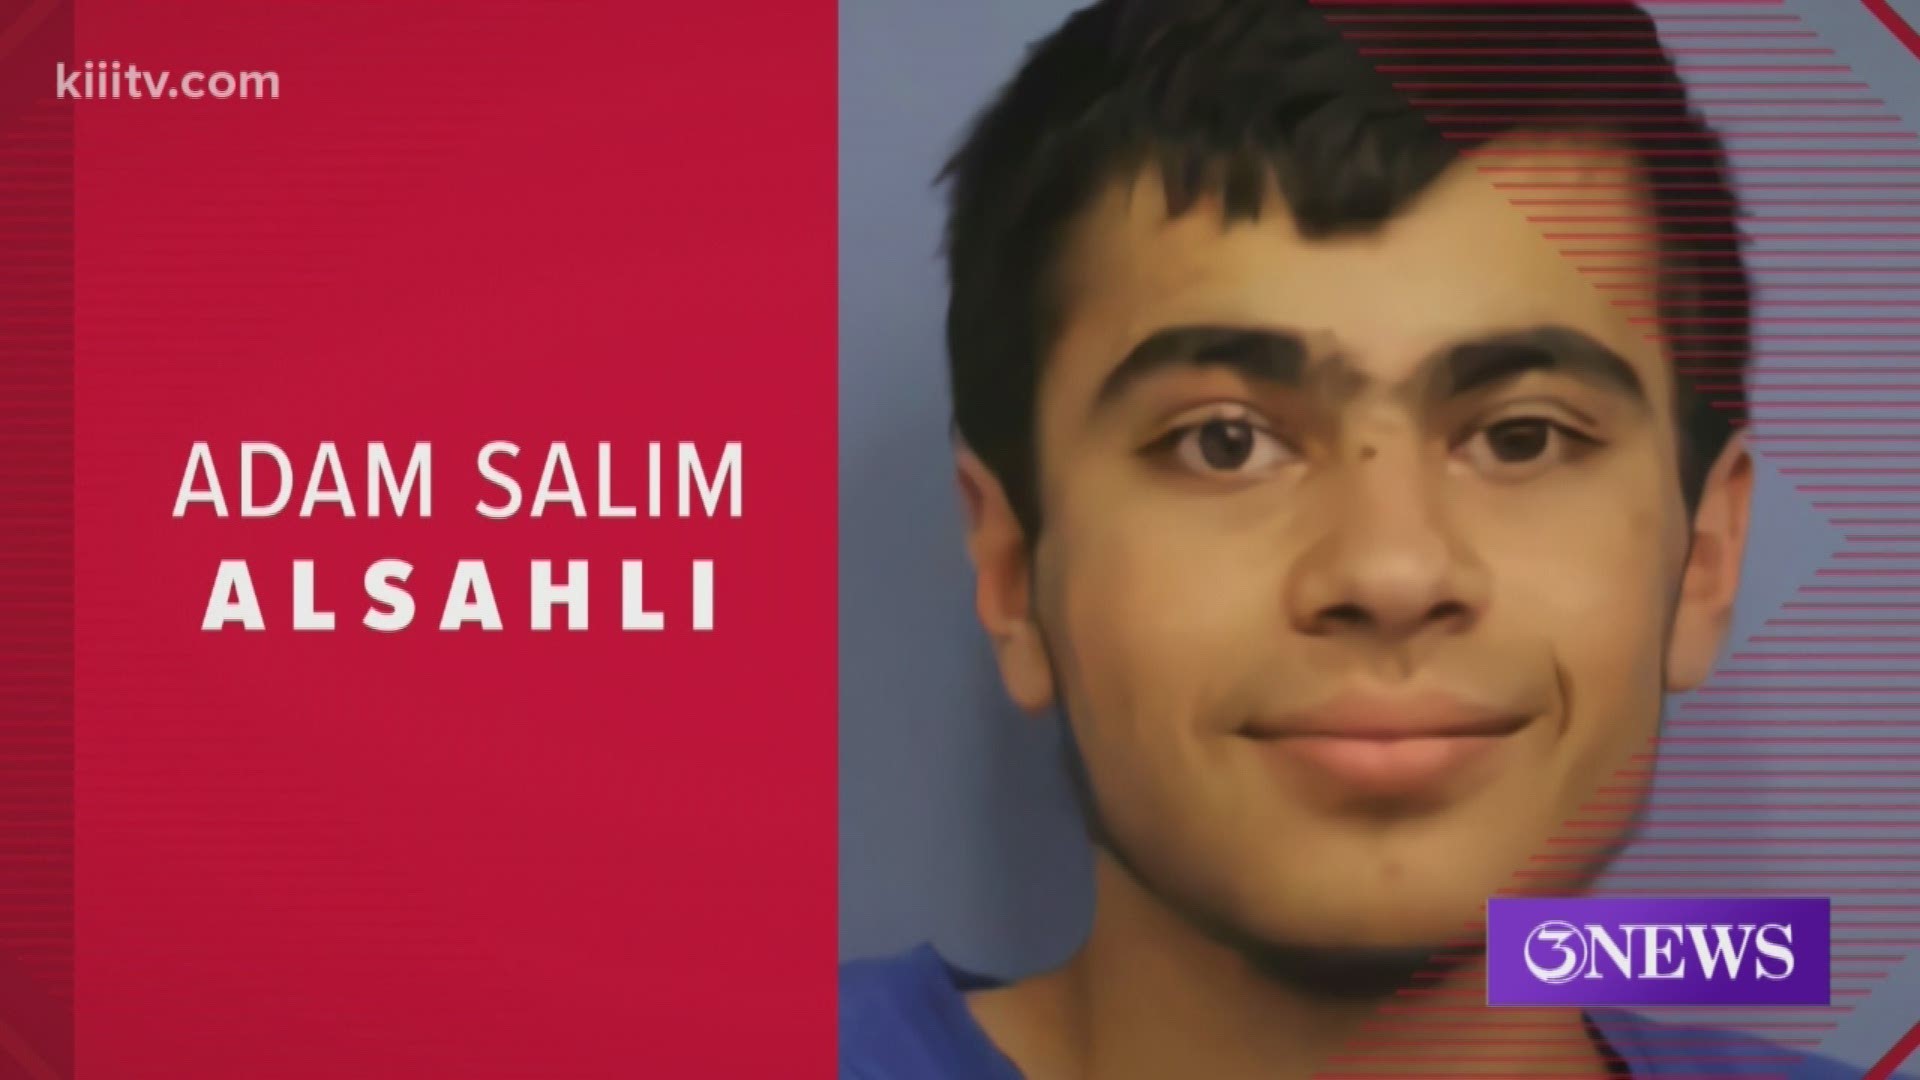 Adam Salim Alsahli expressed support for extremist groups in online posts according to the FBI.